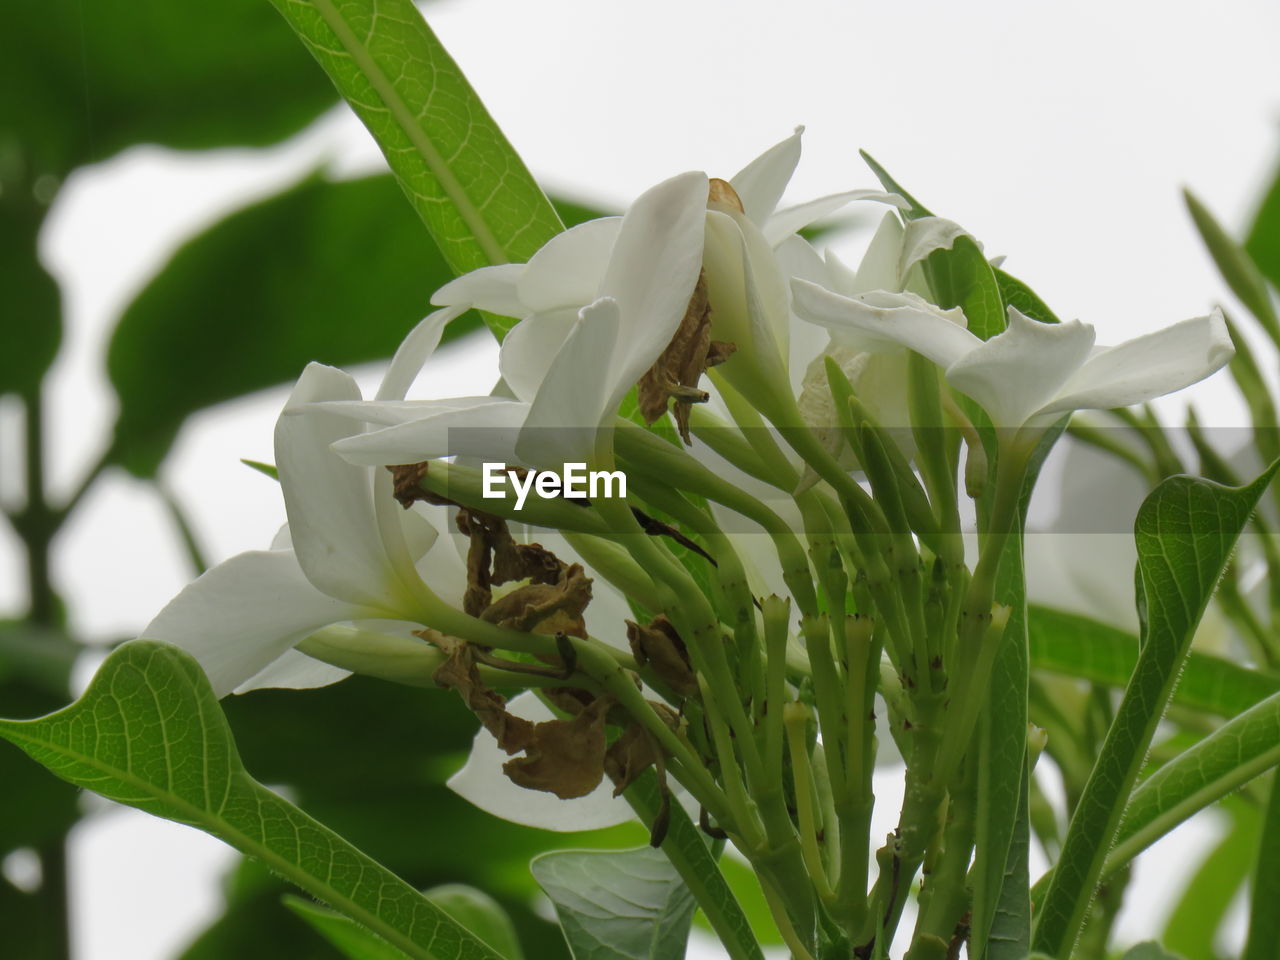 CLOSE-UP OF WHITE FLOWERING PLANT ON GREEN LEAF